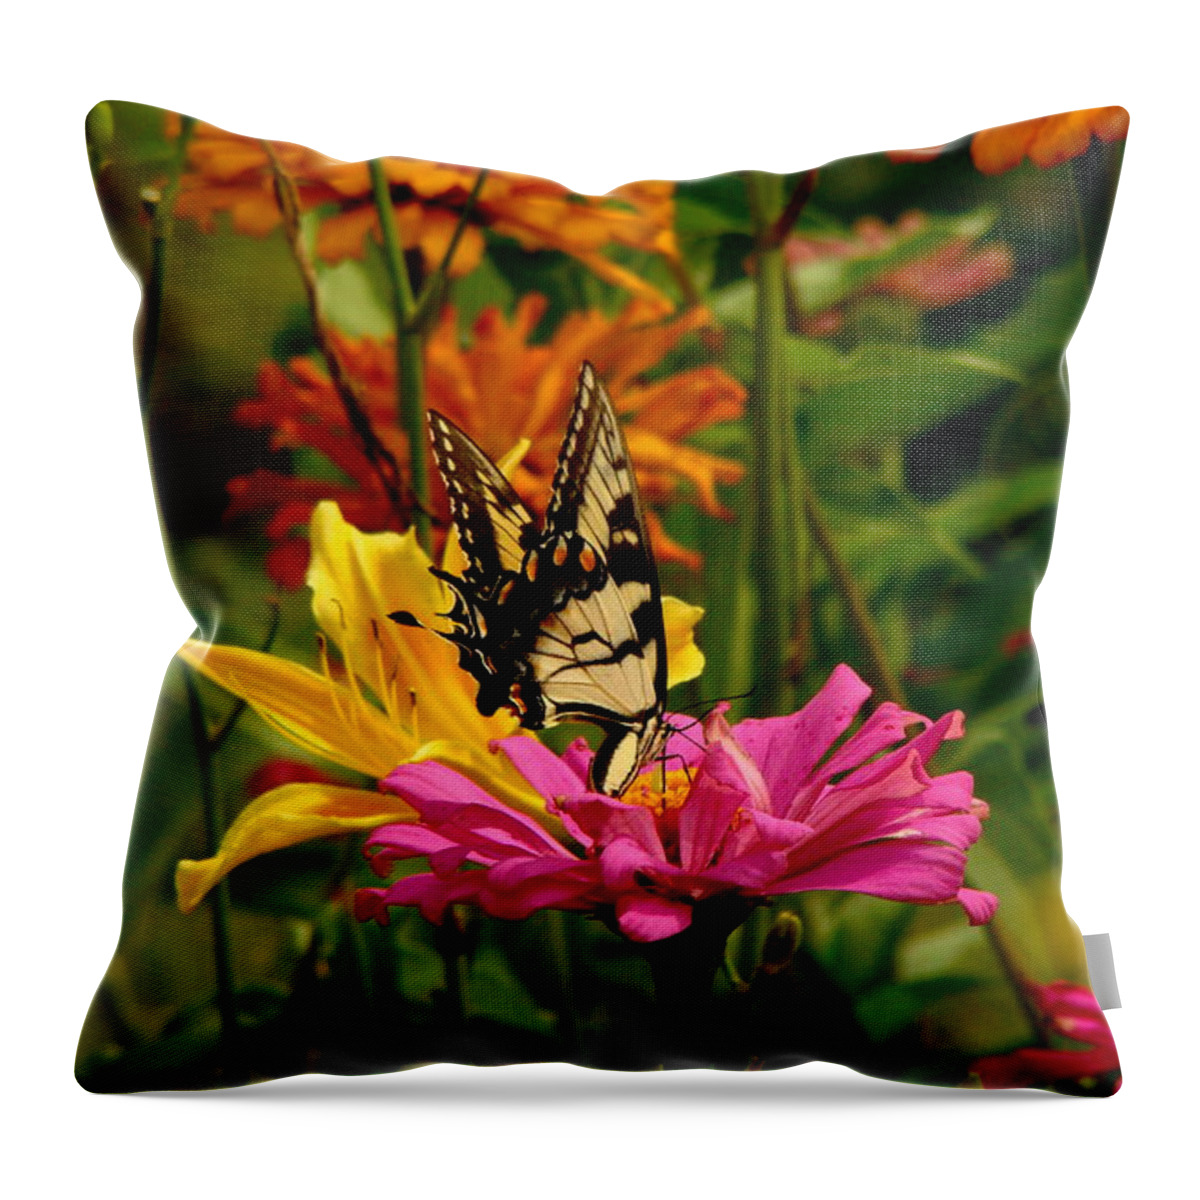 Fine Art Throw Pillow featuring the photograph In Another World by Rodney Lee Williams